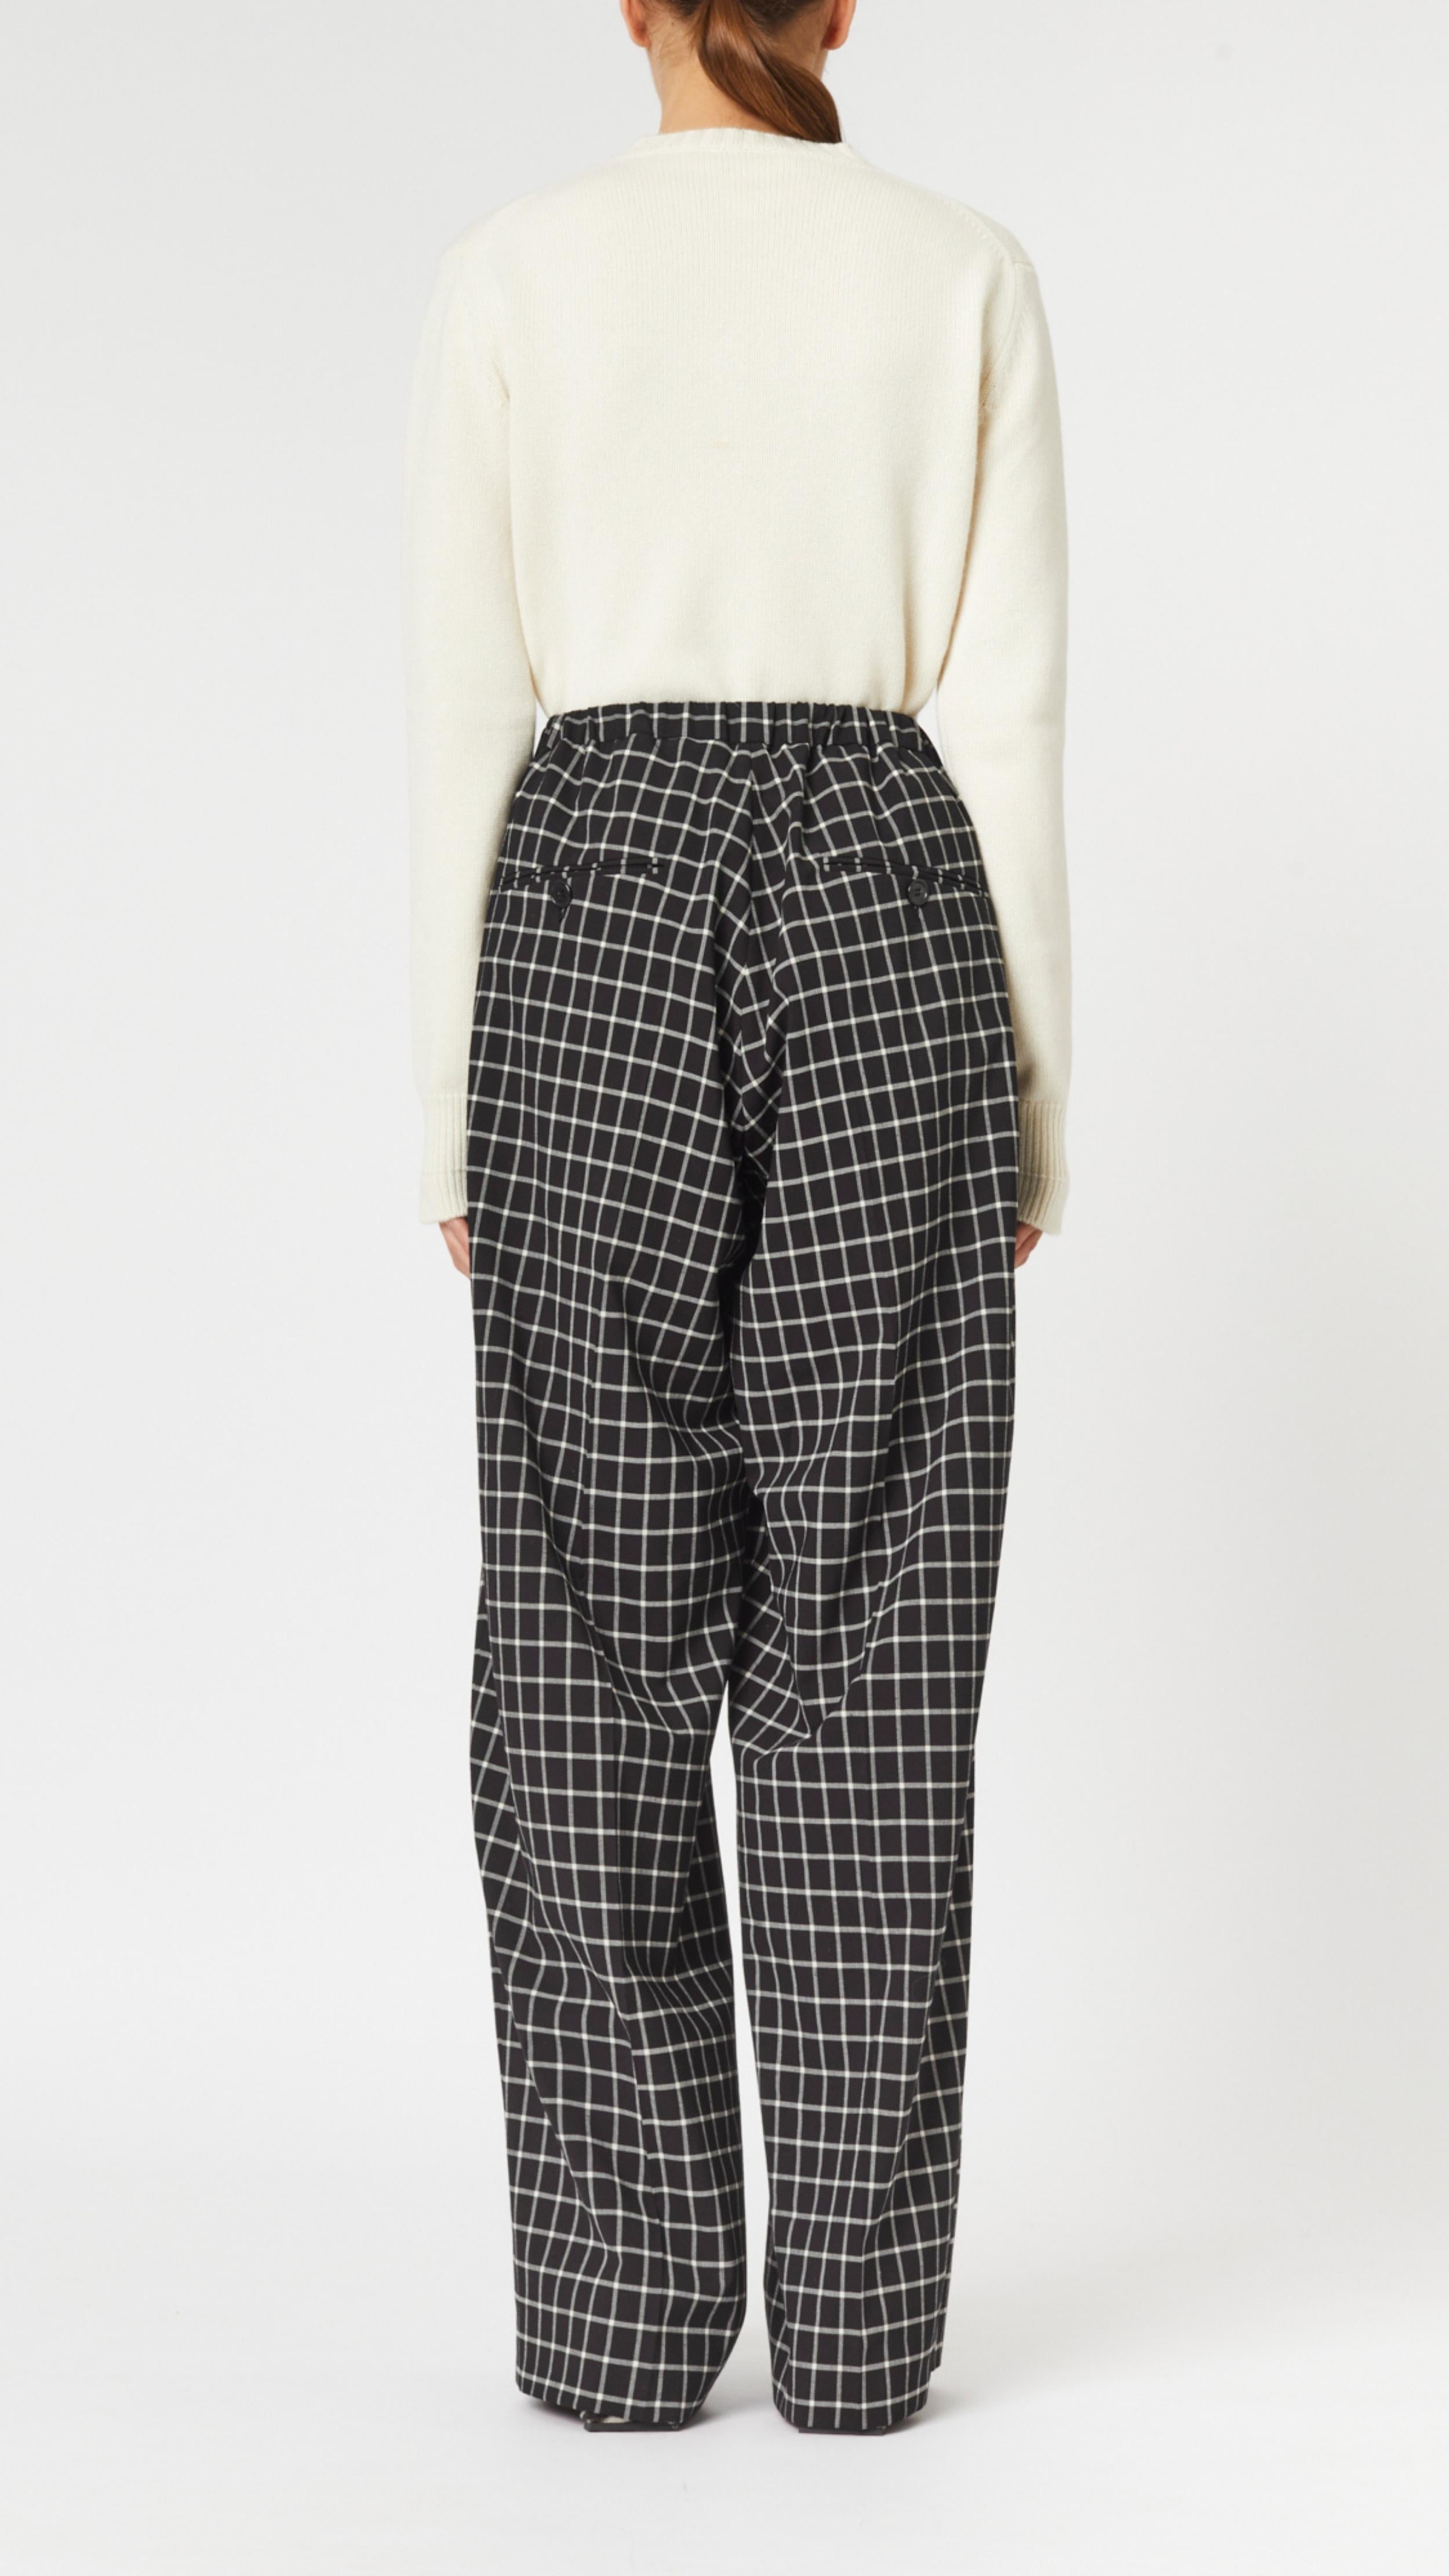 Plan C Checked Black Trousers. Loose fitting suit trousers with a drawstring adjustable waist in a classic black and white check patttern. Modern and oversized style. Shown on model facing back.